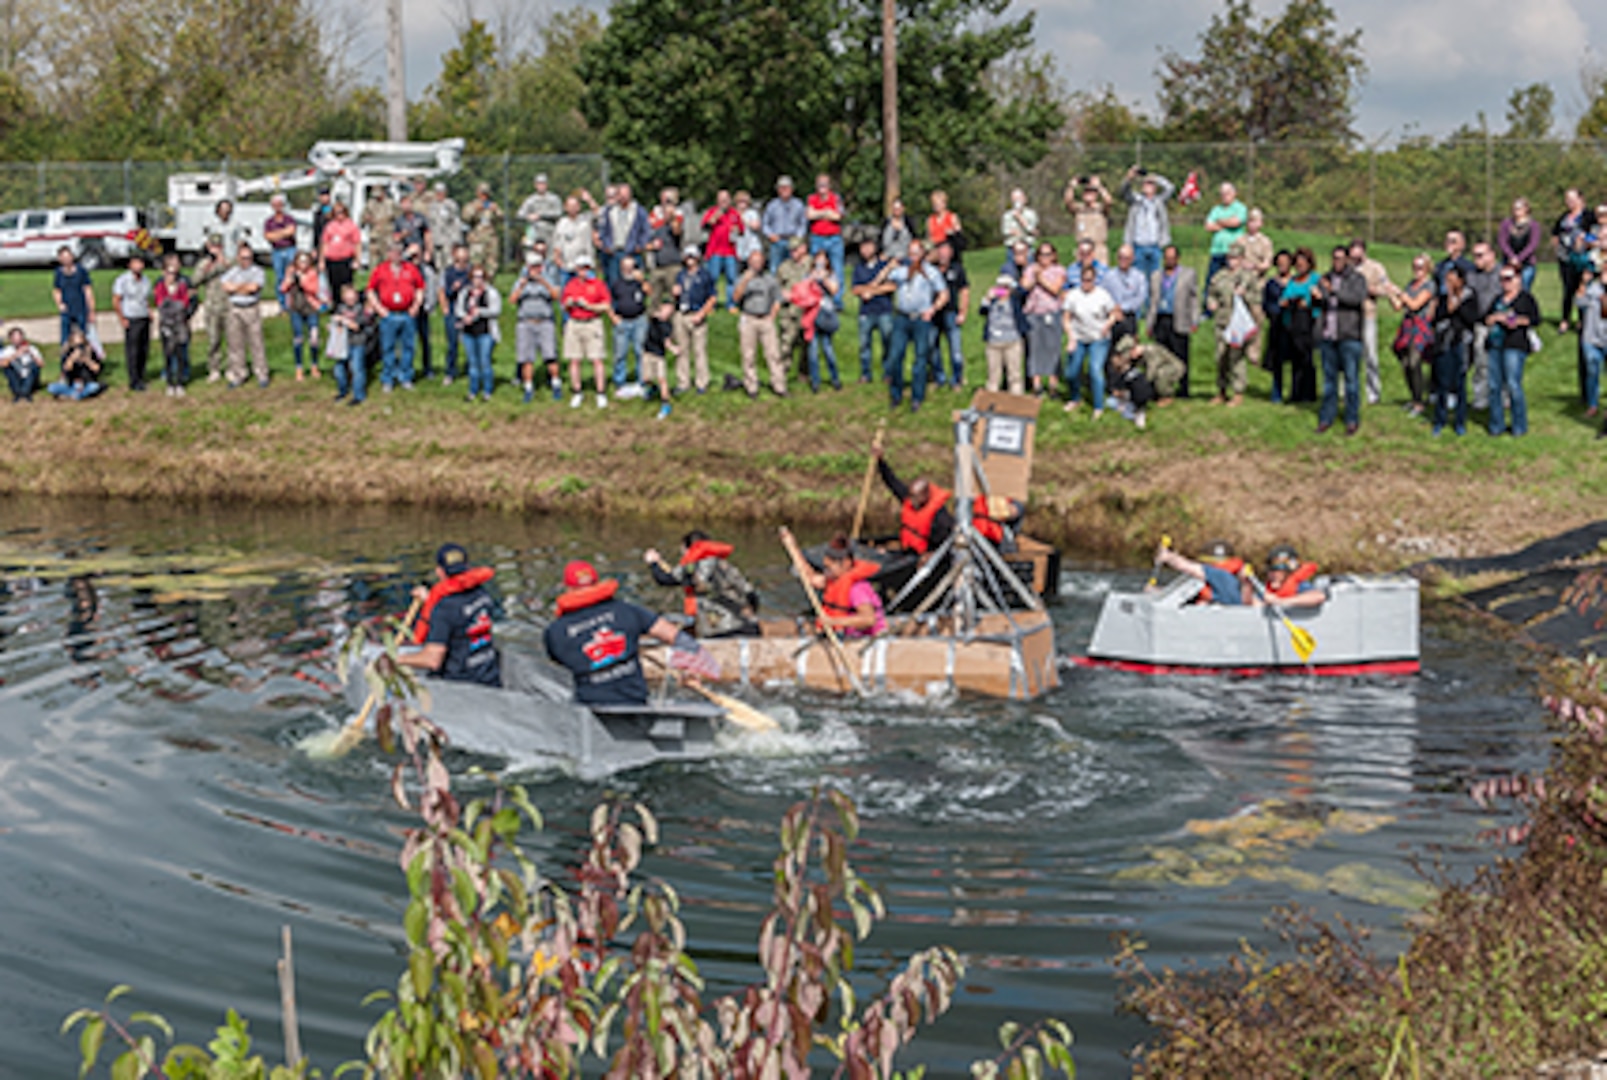 Associates surrounded the Eagle Eye Golf Course pond to watch teams compete in the 3rd Annual Cardboard Regatta